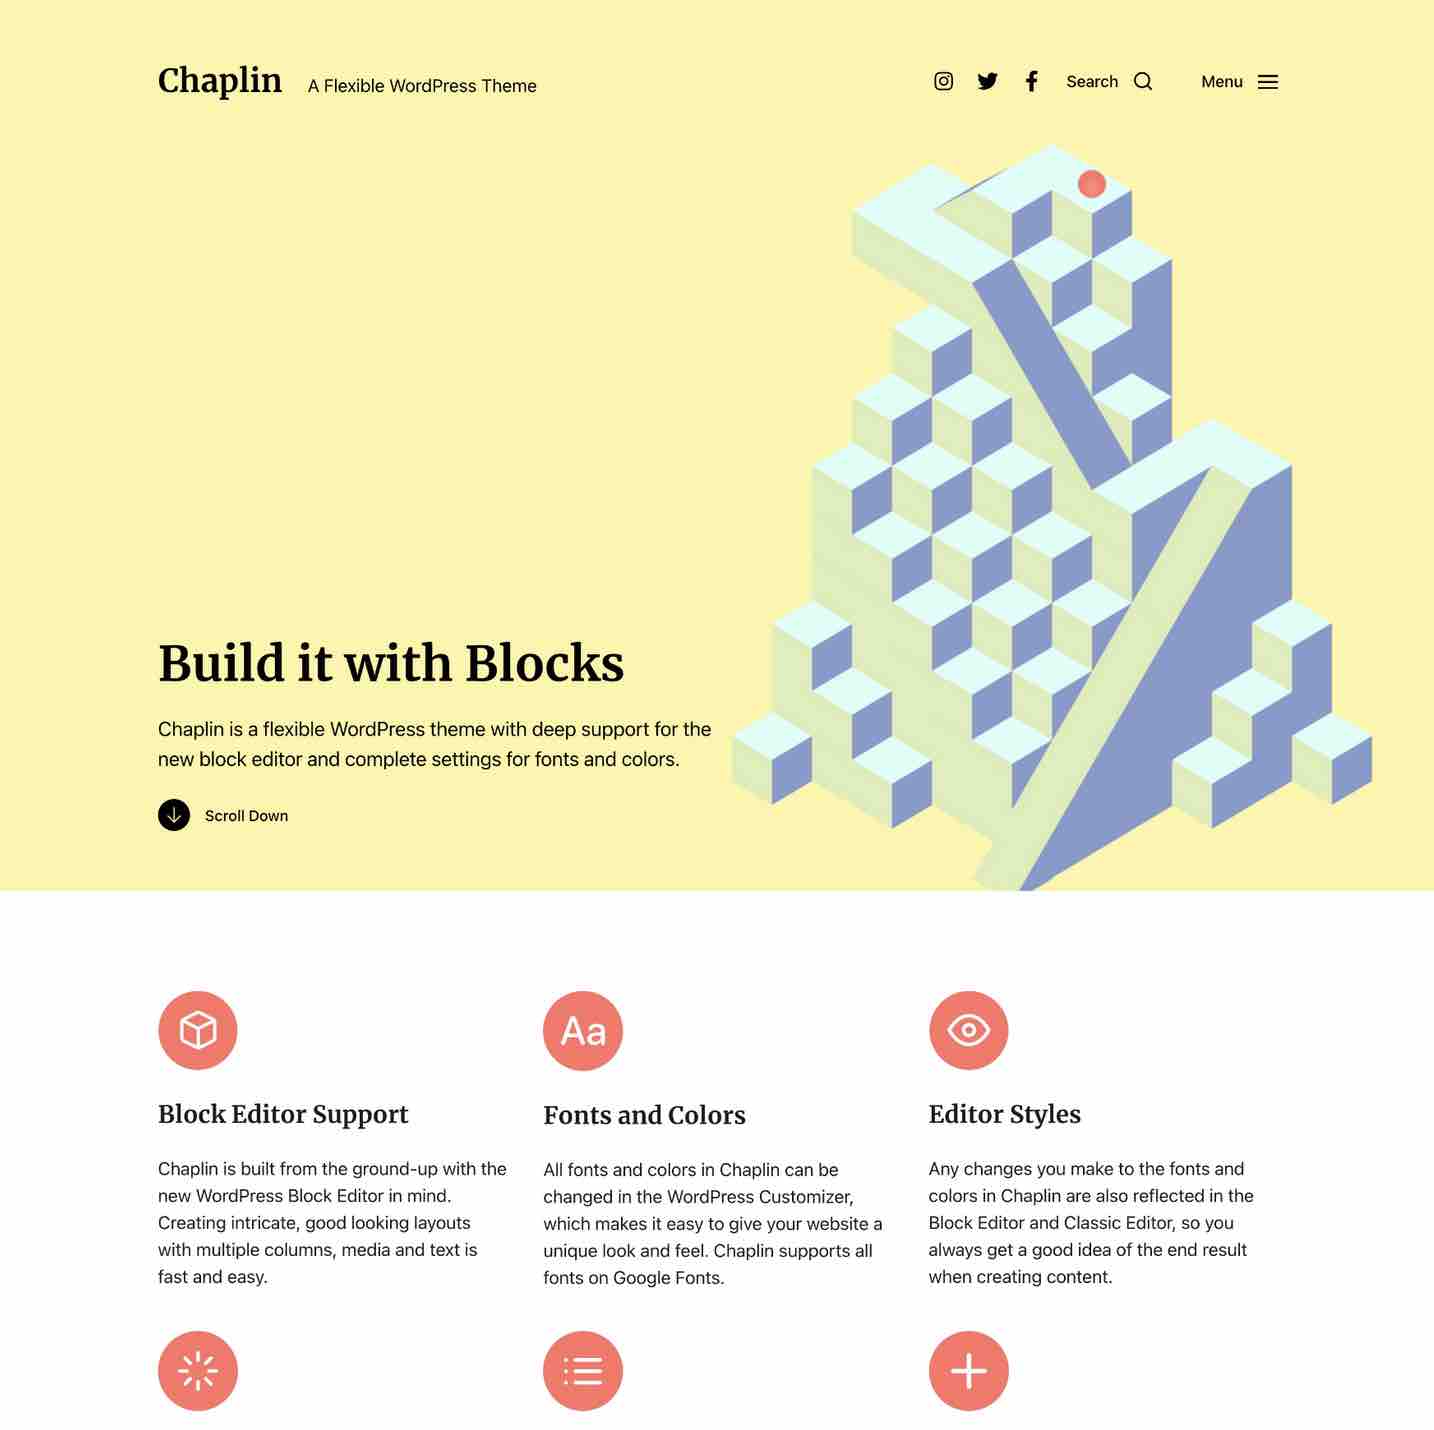 Chaplin is a WordPress theme created by Anders Norén. 